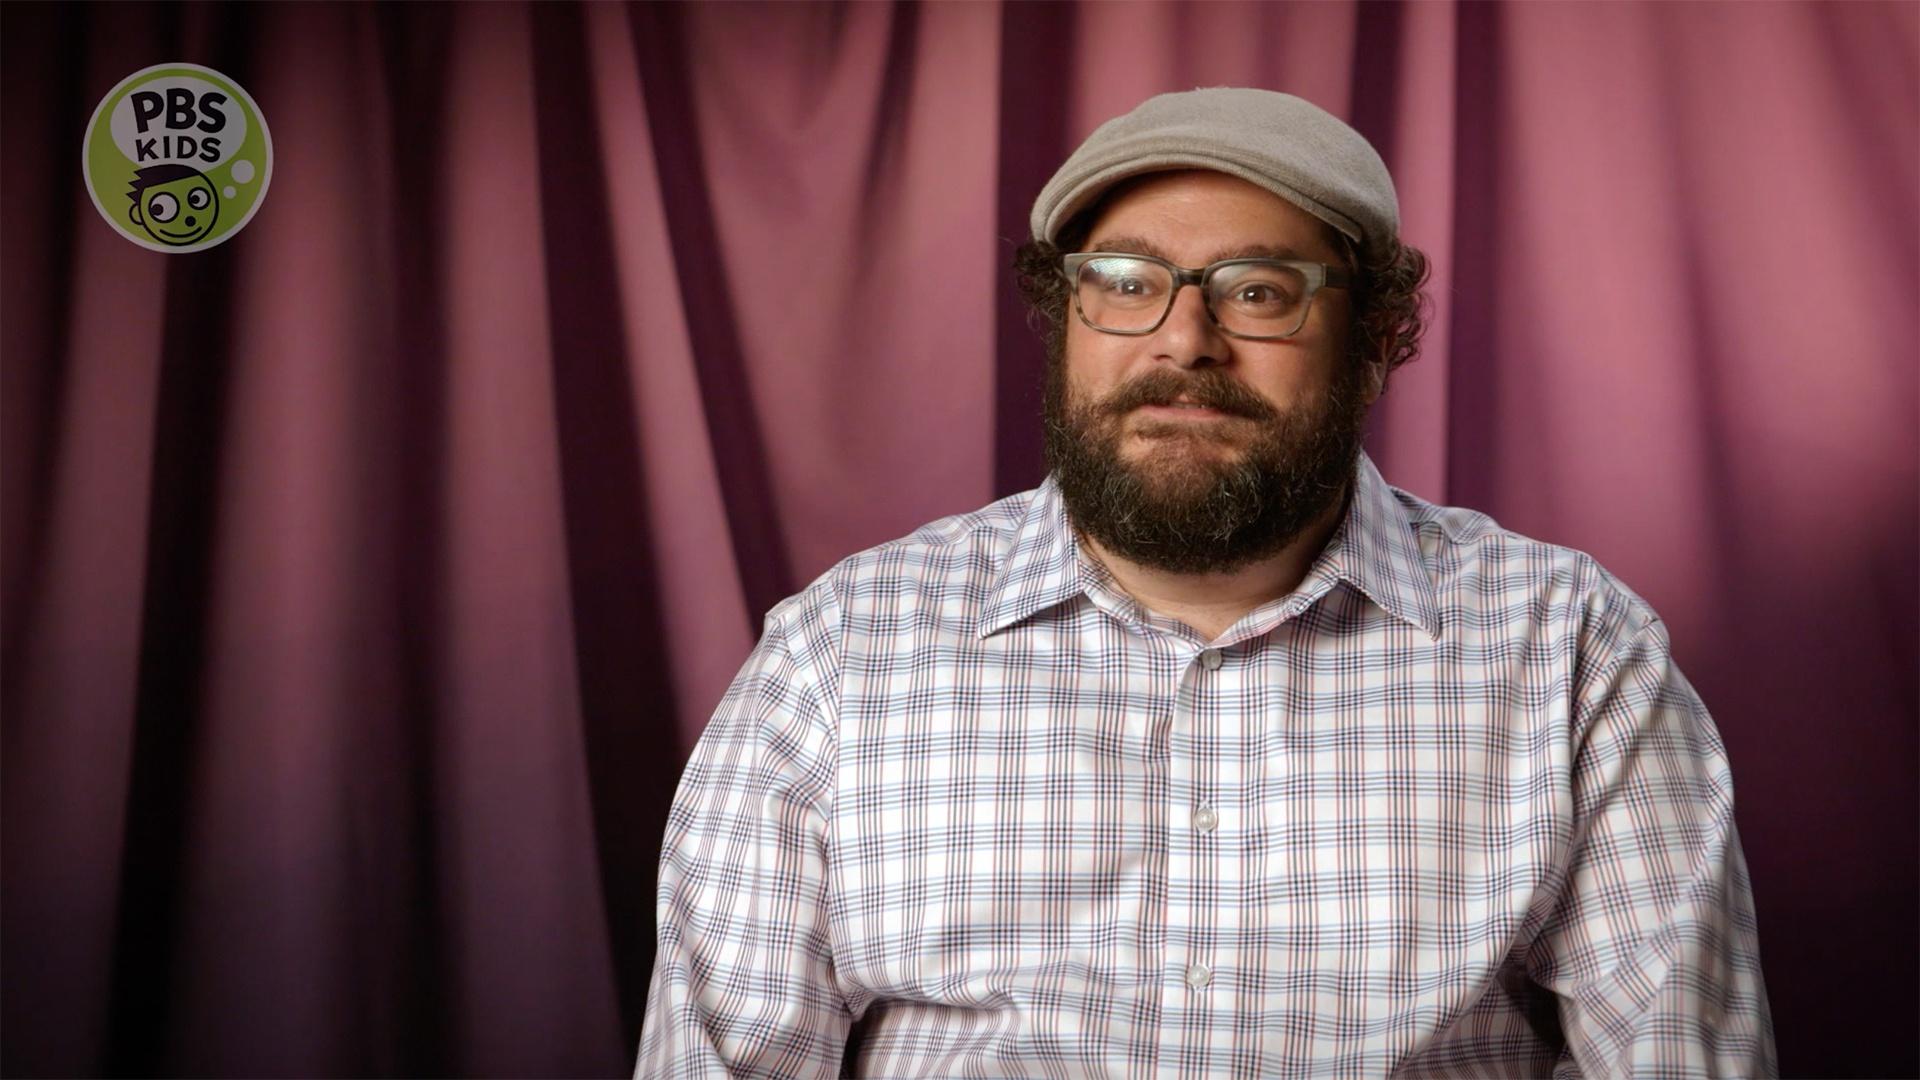 Bobby Moynihan: PBS has been helping kids forever!